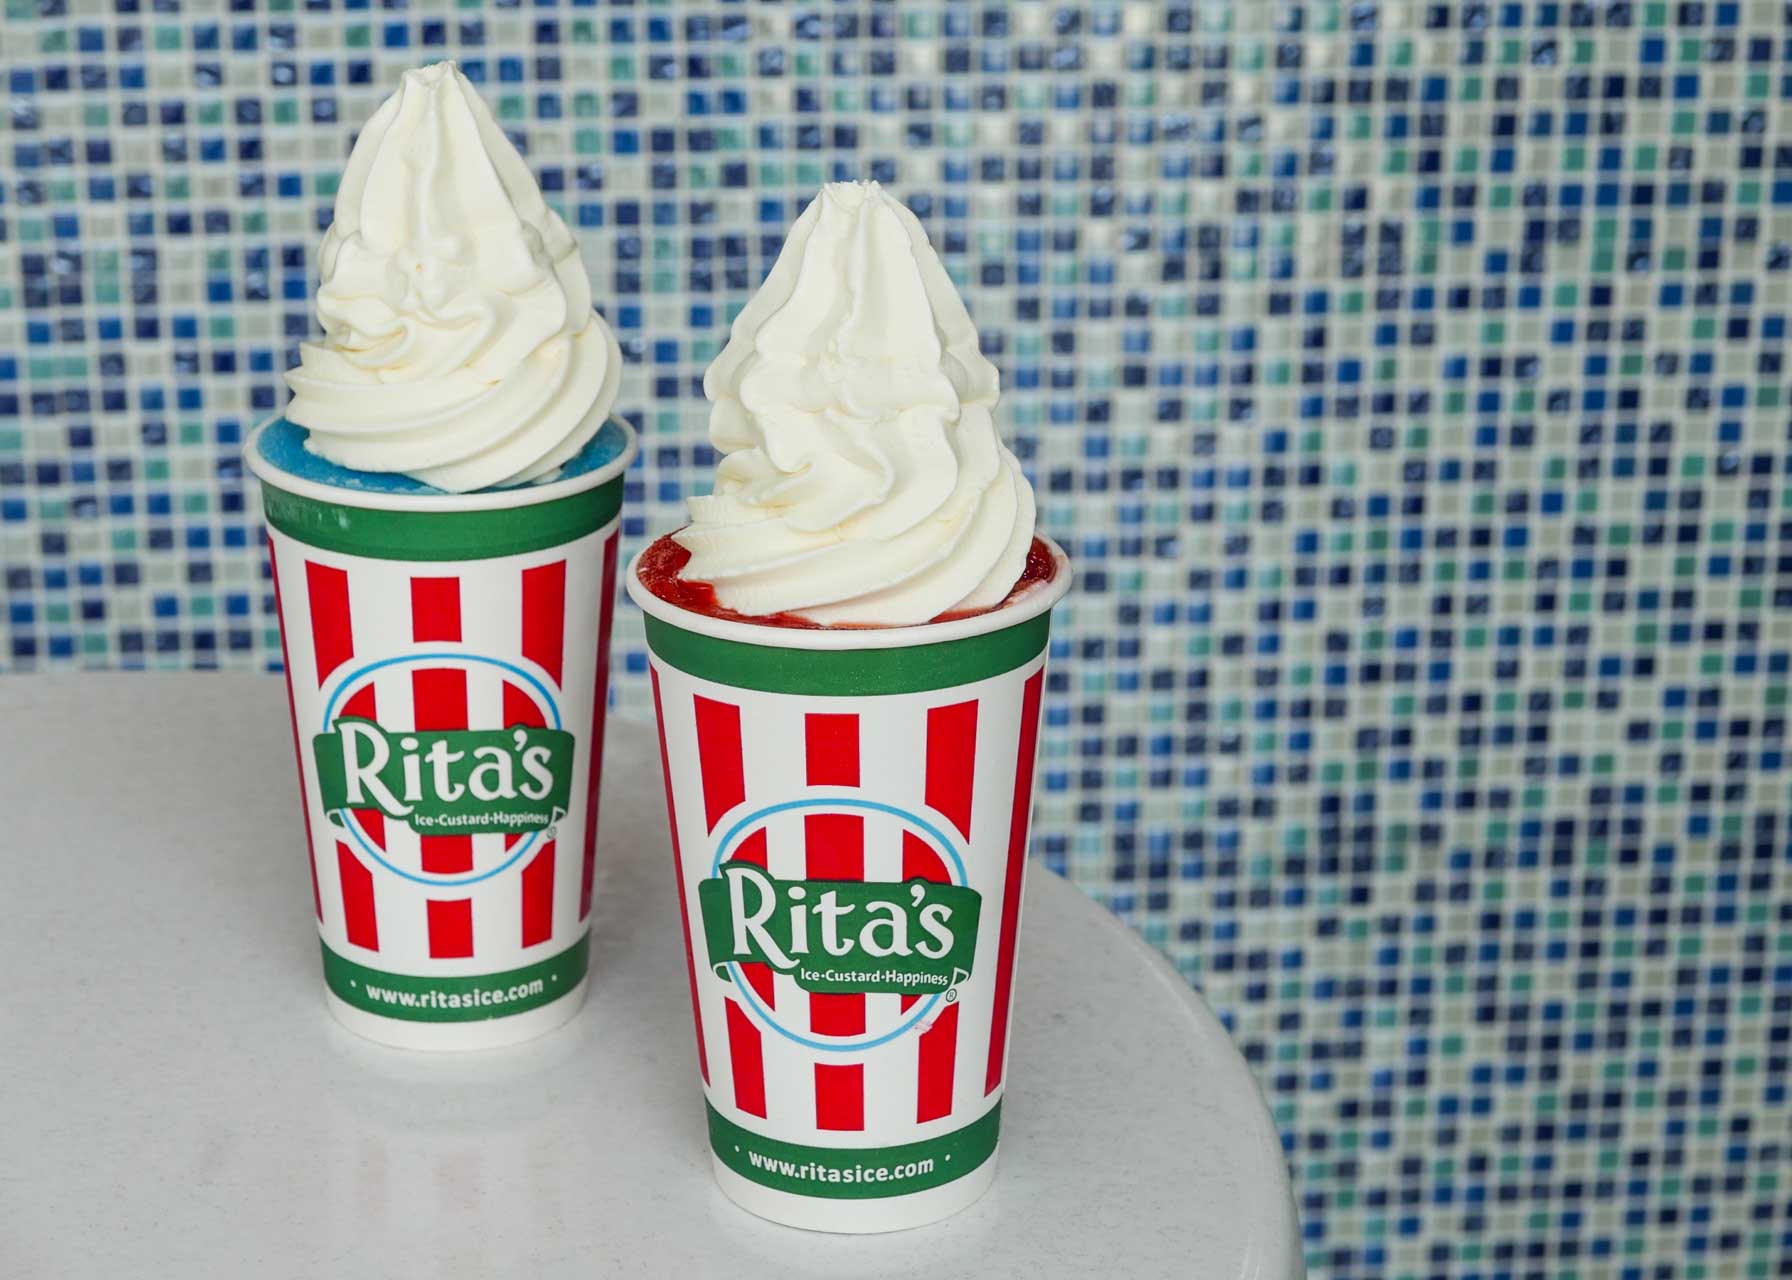 Hit that perfect sweet spot with these treats from Rita’s Italian Ice!